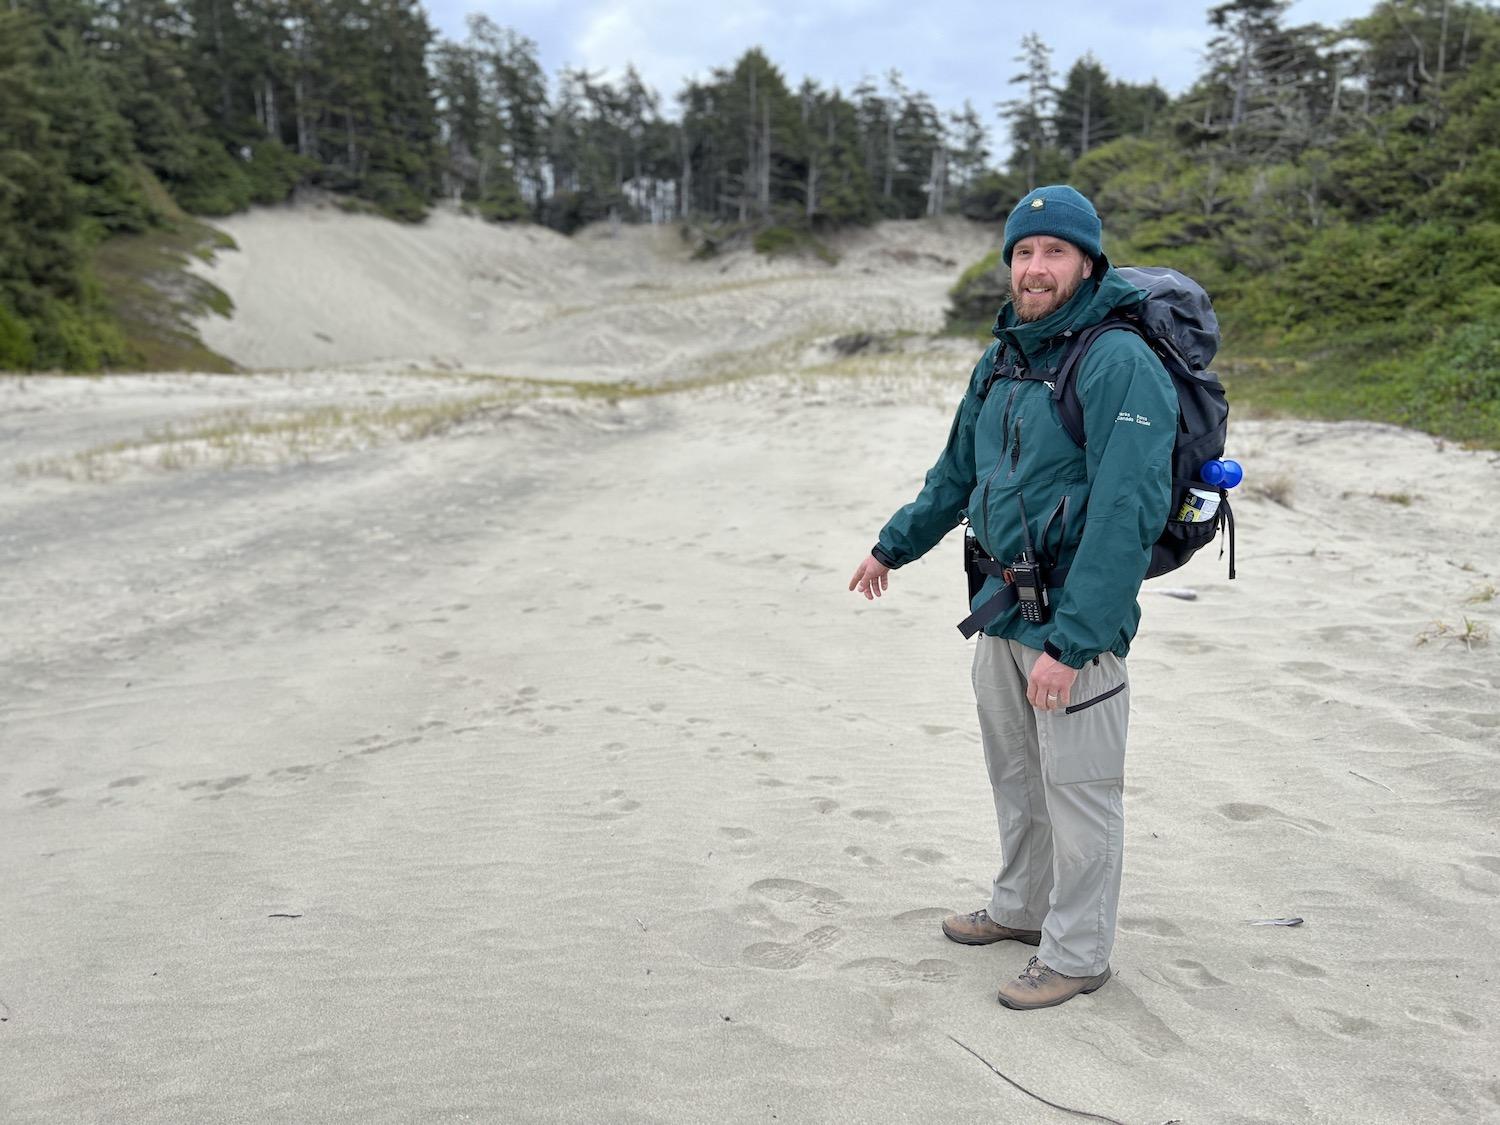 Todd Windle explores the sand dunes of Wickaninnish Beach looking for wolf tracks and scat.